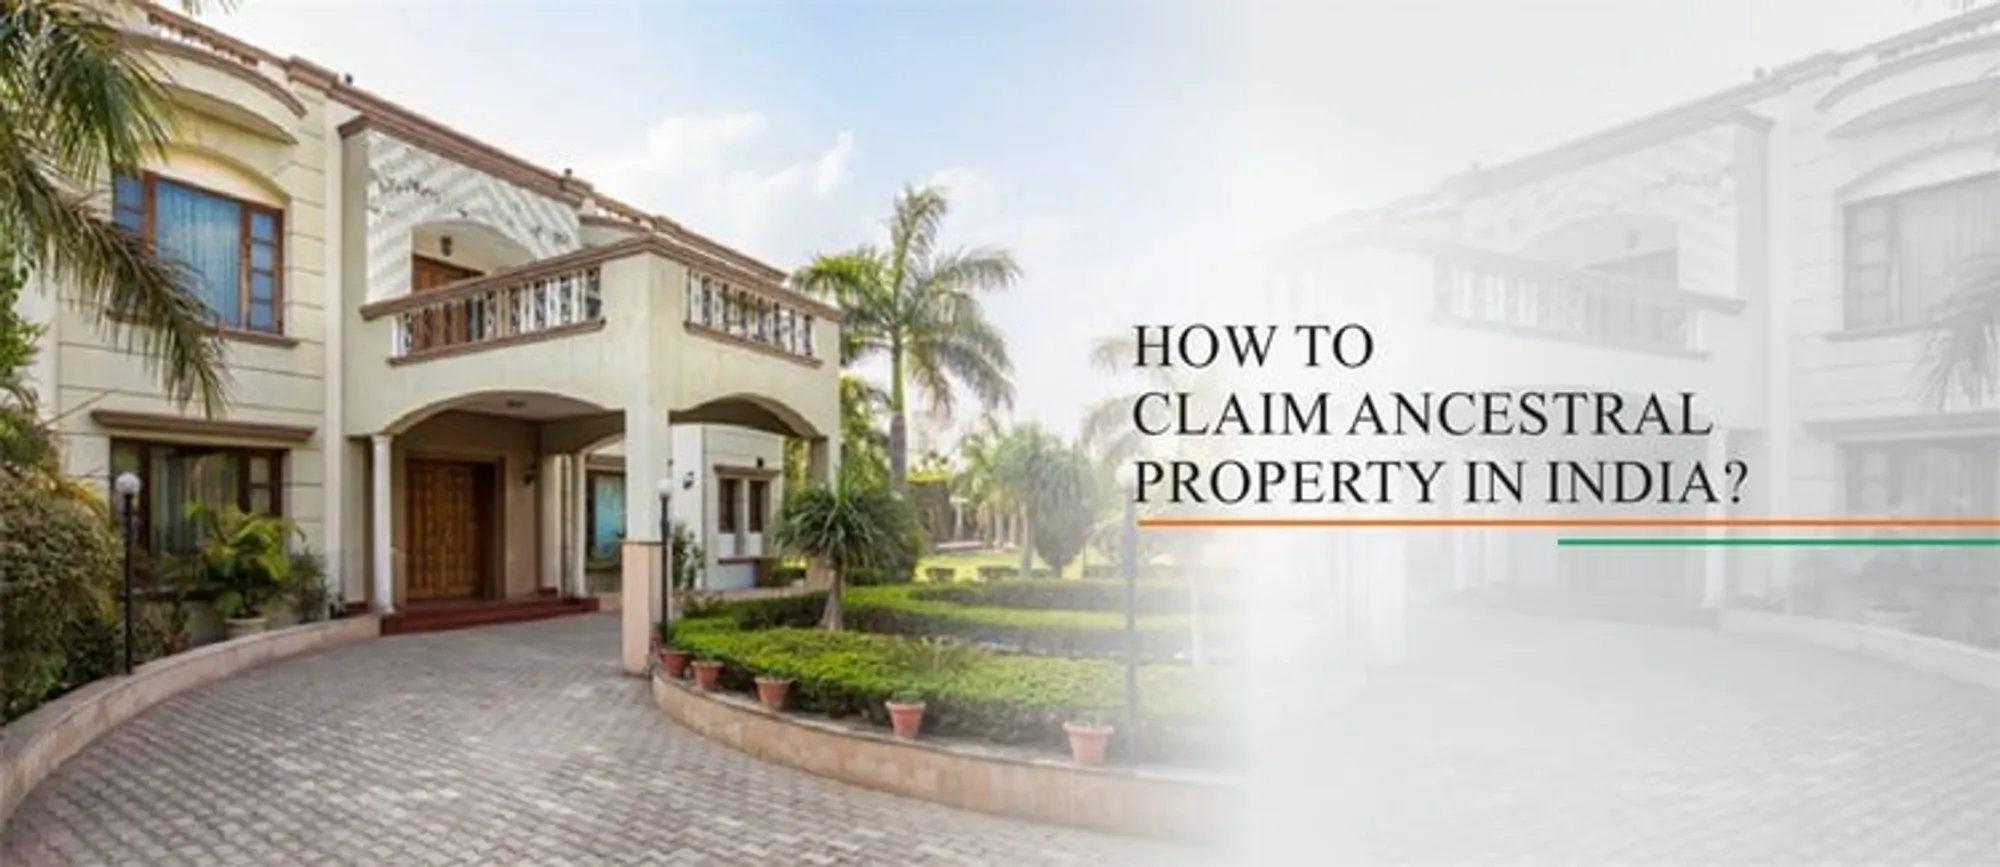 How to Claim Ancestral Property in India